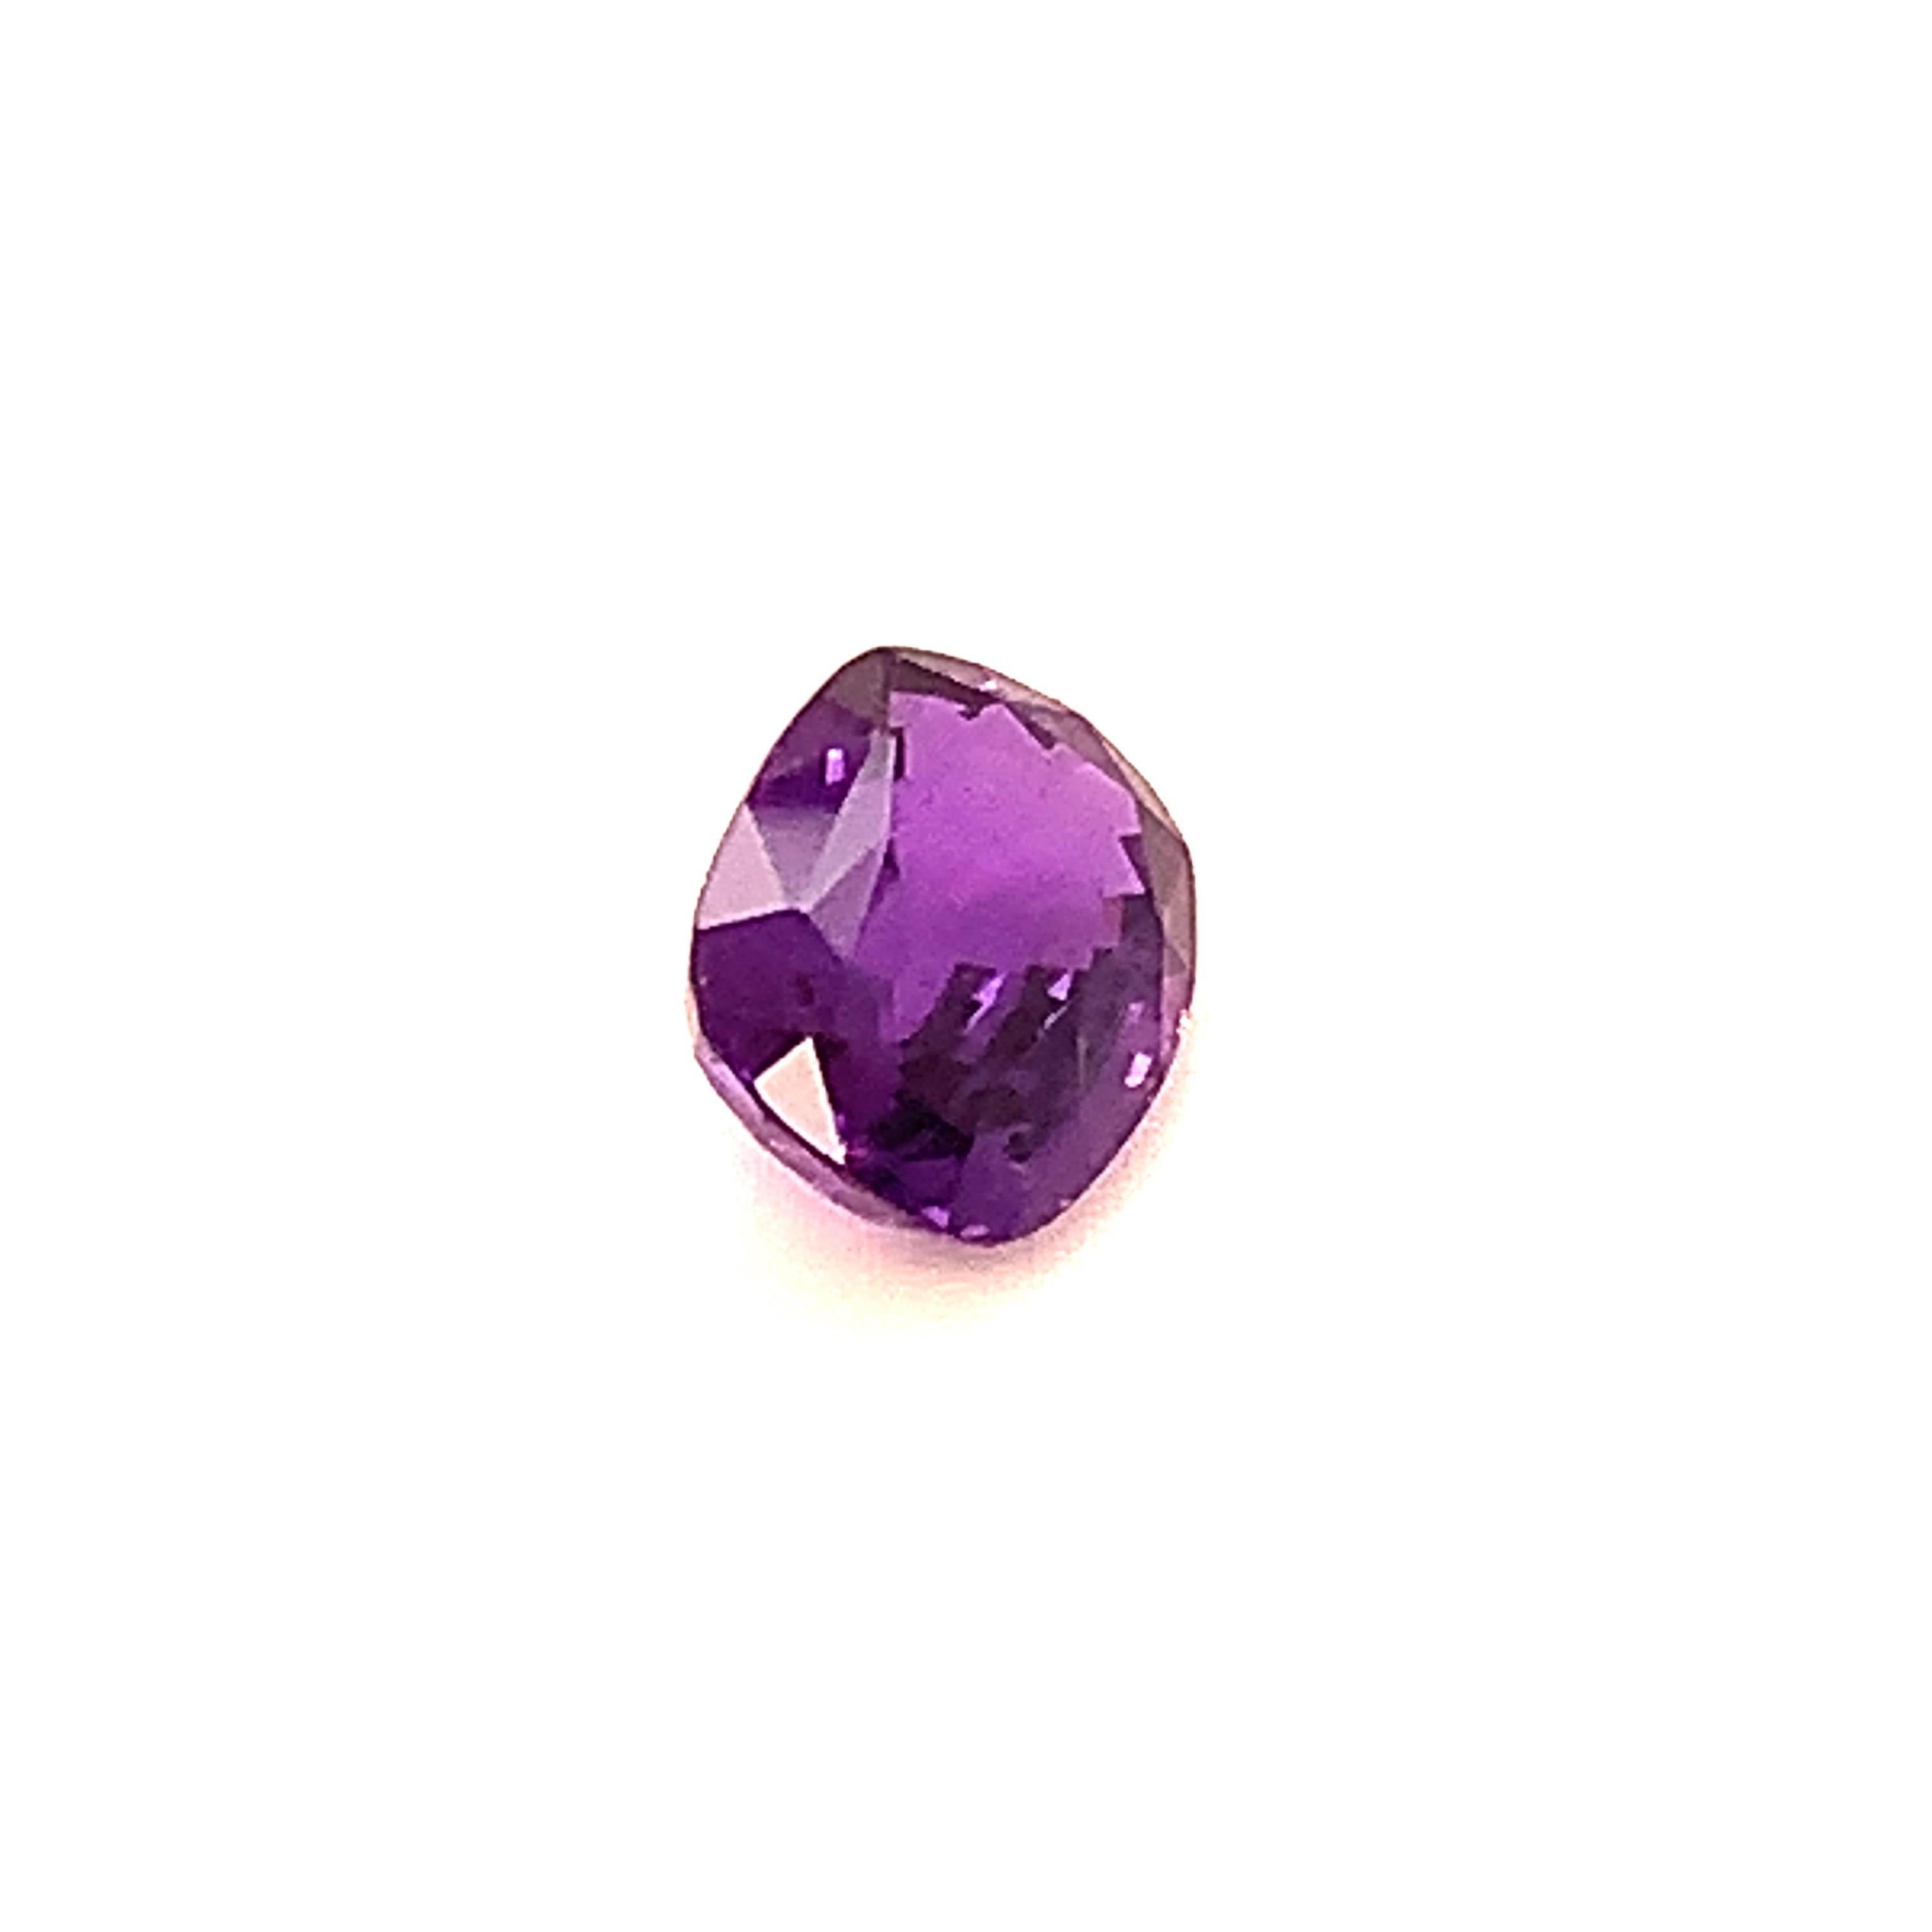 Unheated 3.50 Carat Color Change Sapphire, Unset Loose Gemstone, GIA Certified For Sale 1